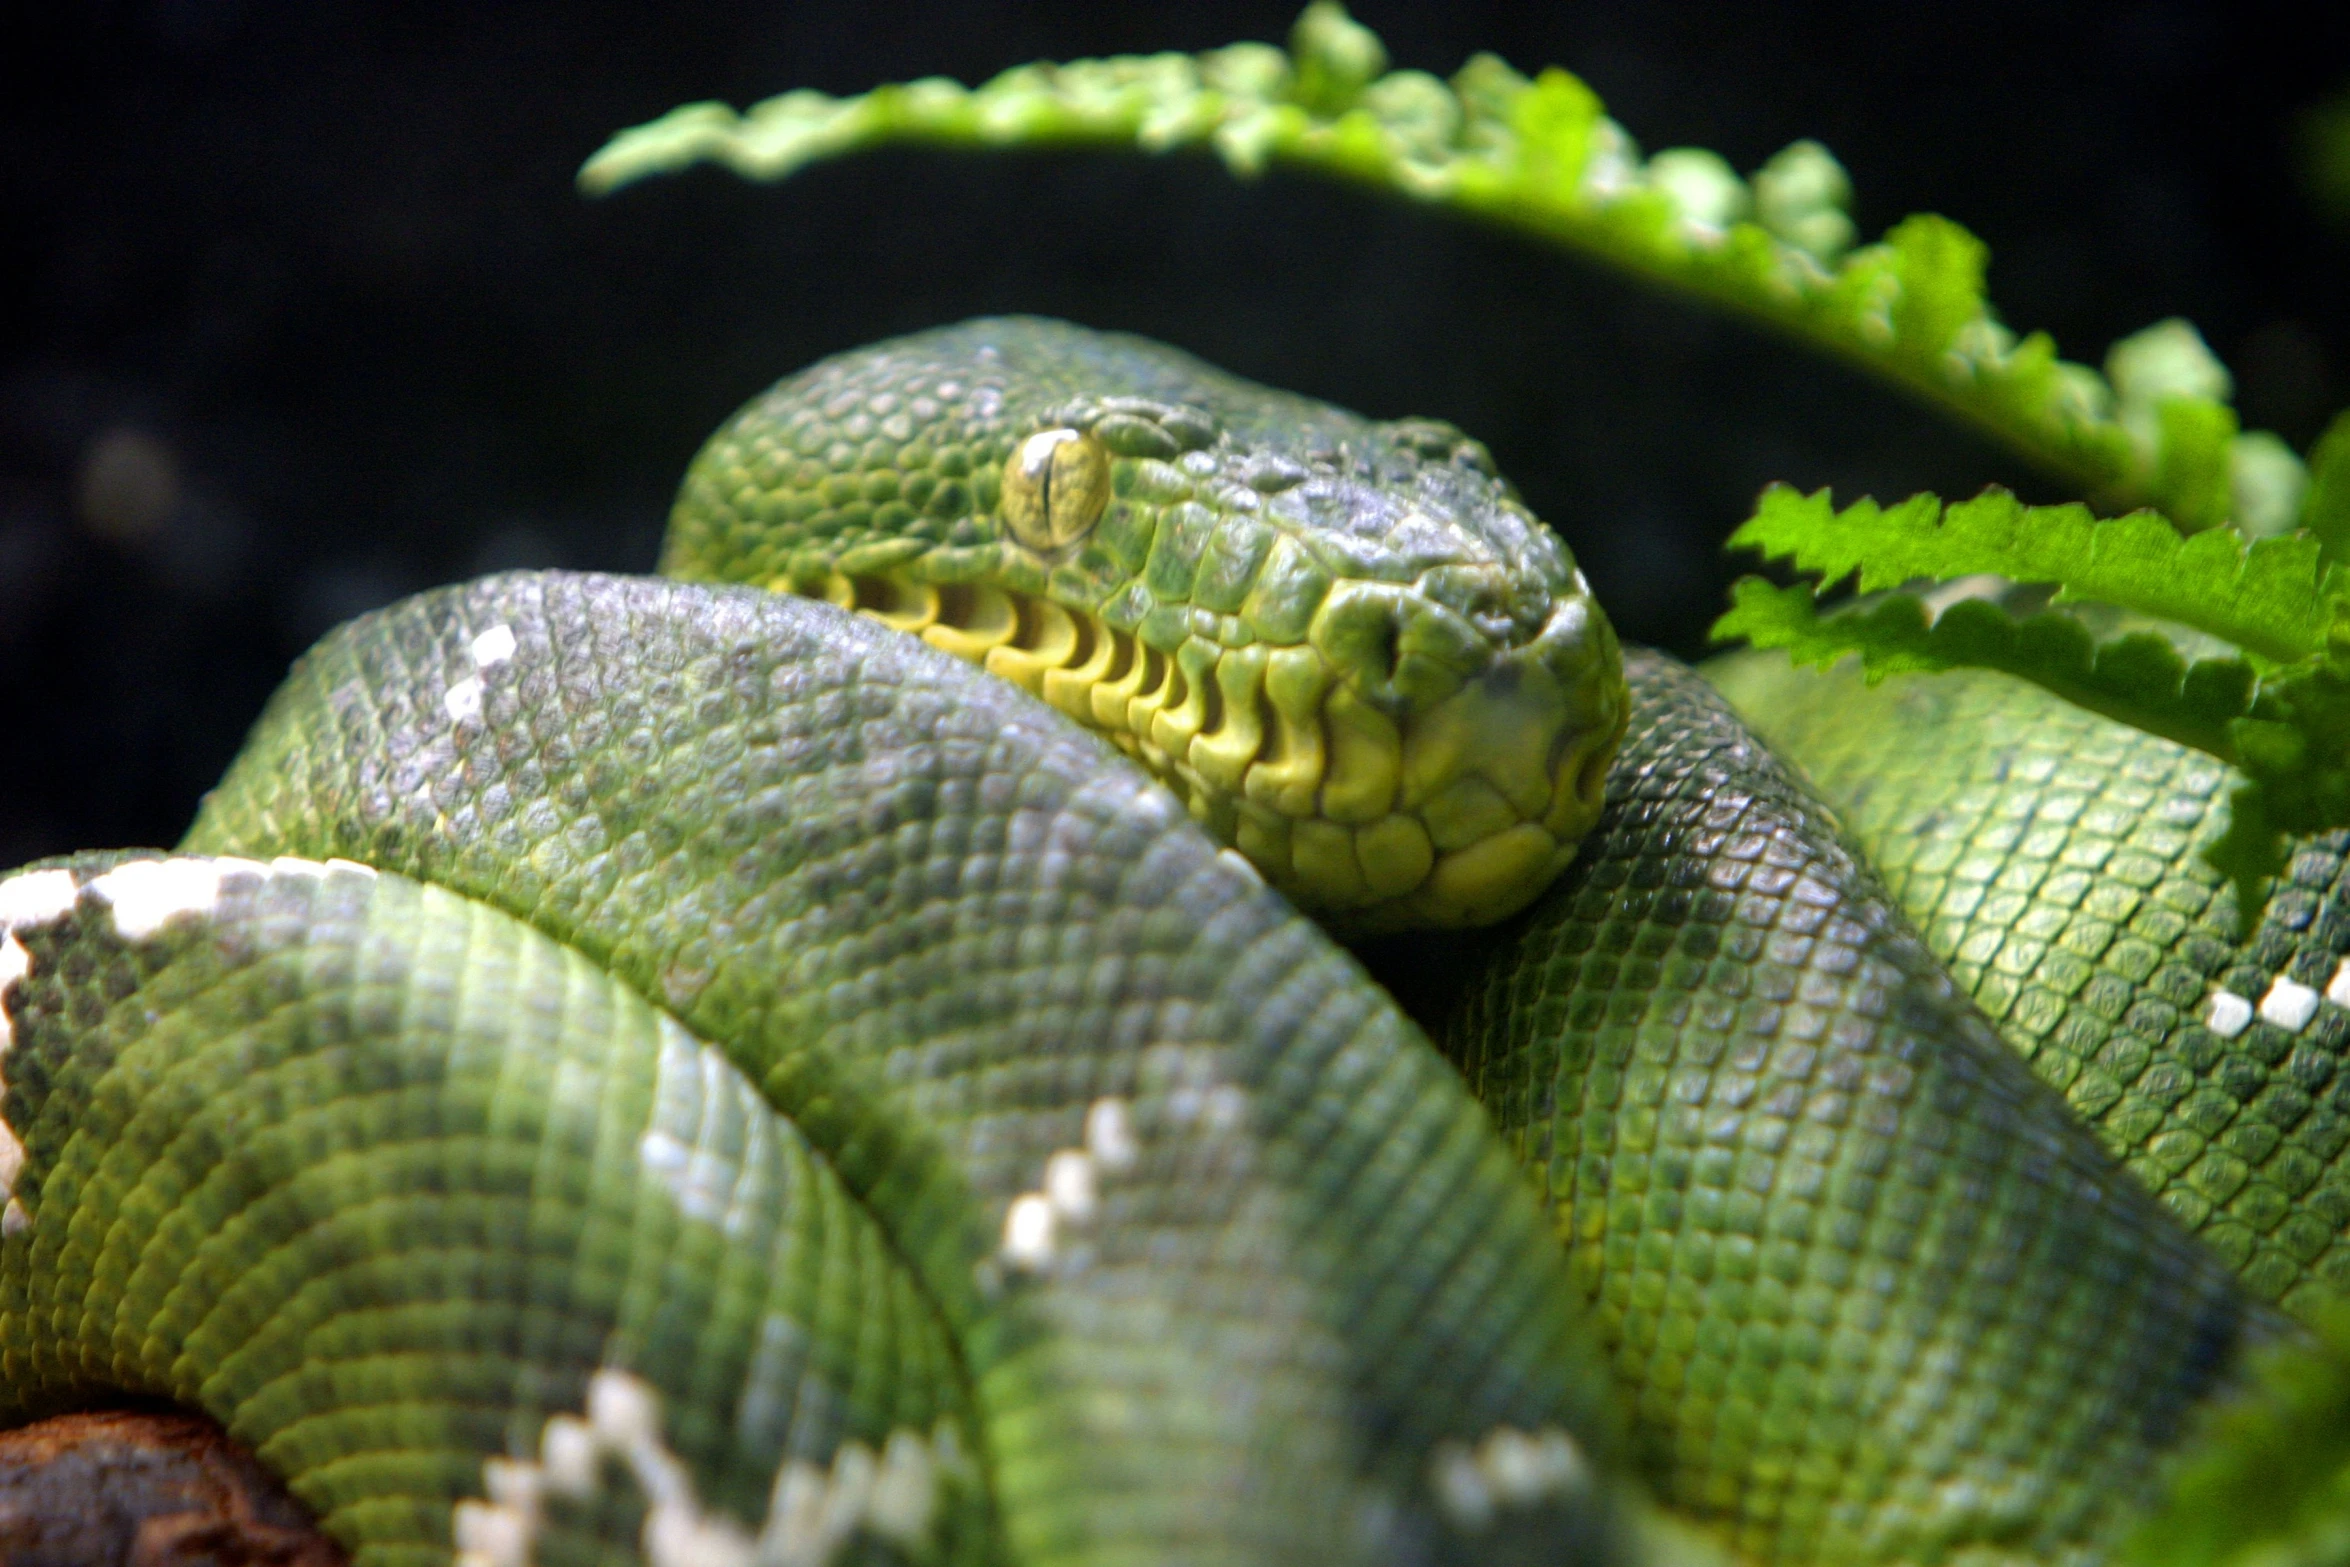 green tree snakes are curled up to one another